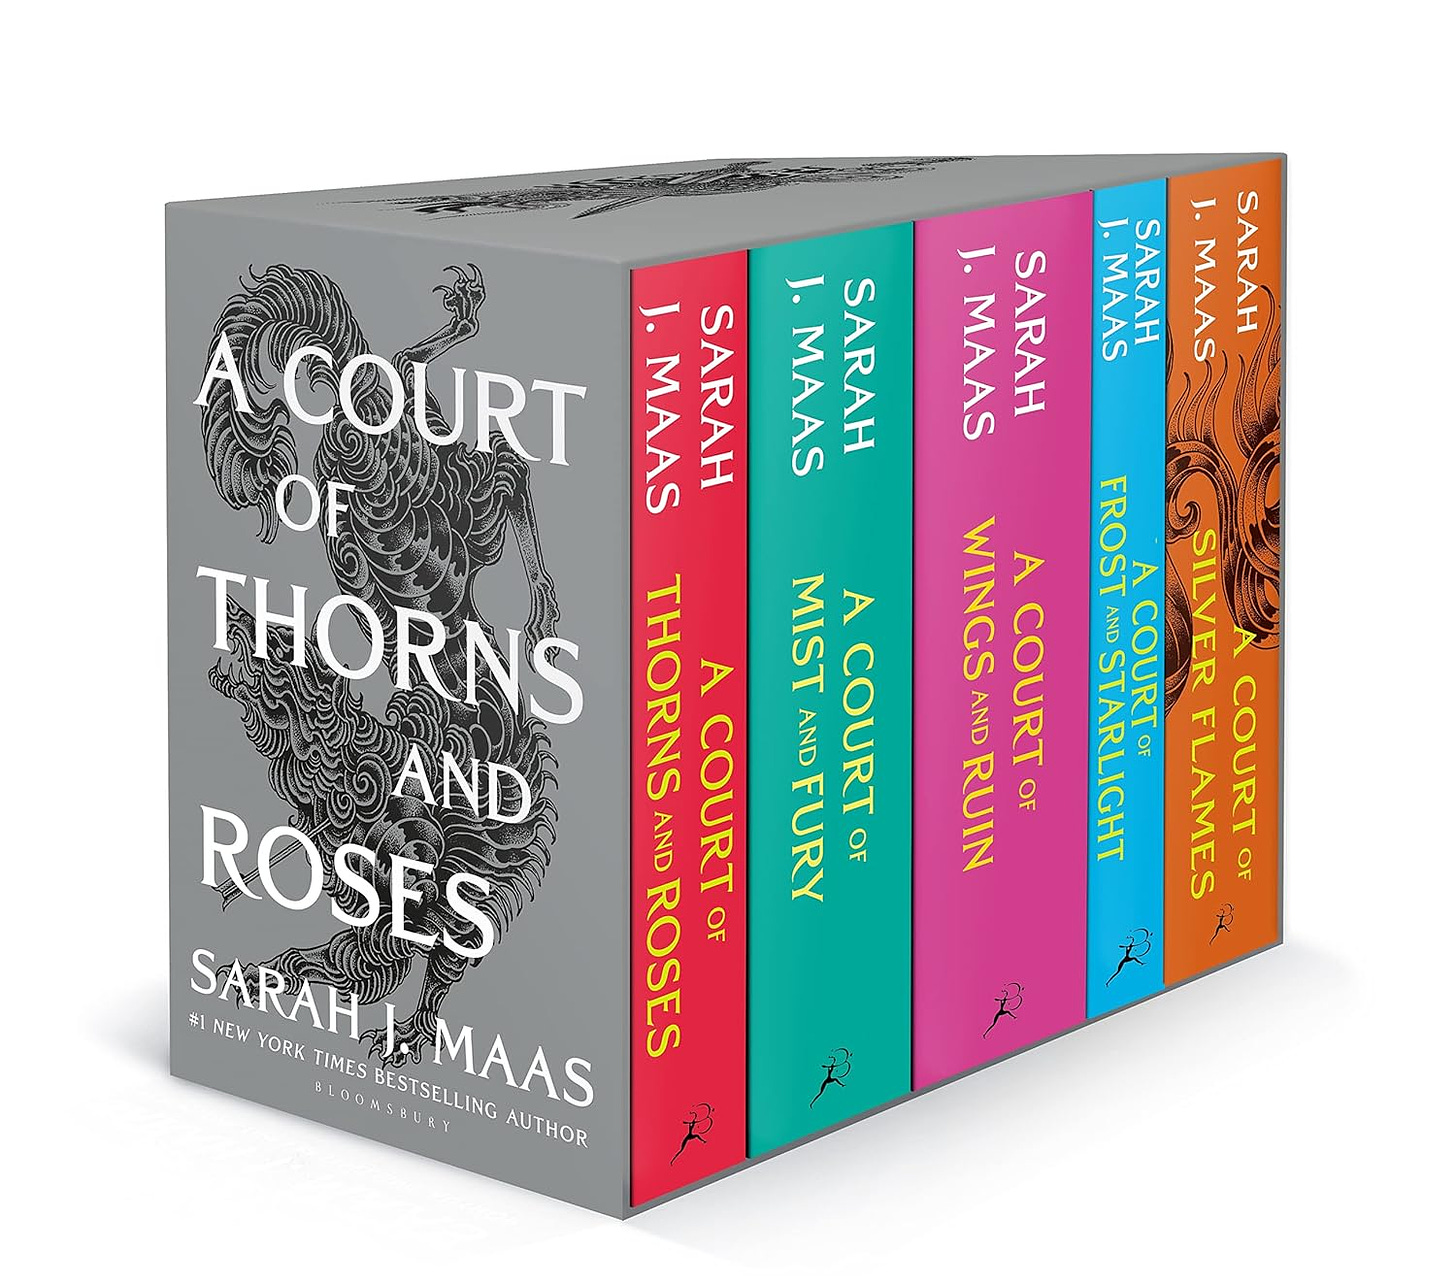 A Court of Thorns and Roses Series by Sarah J. Maas